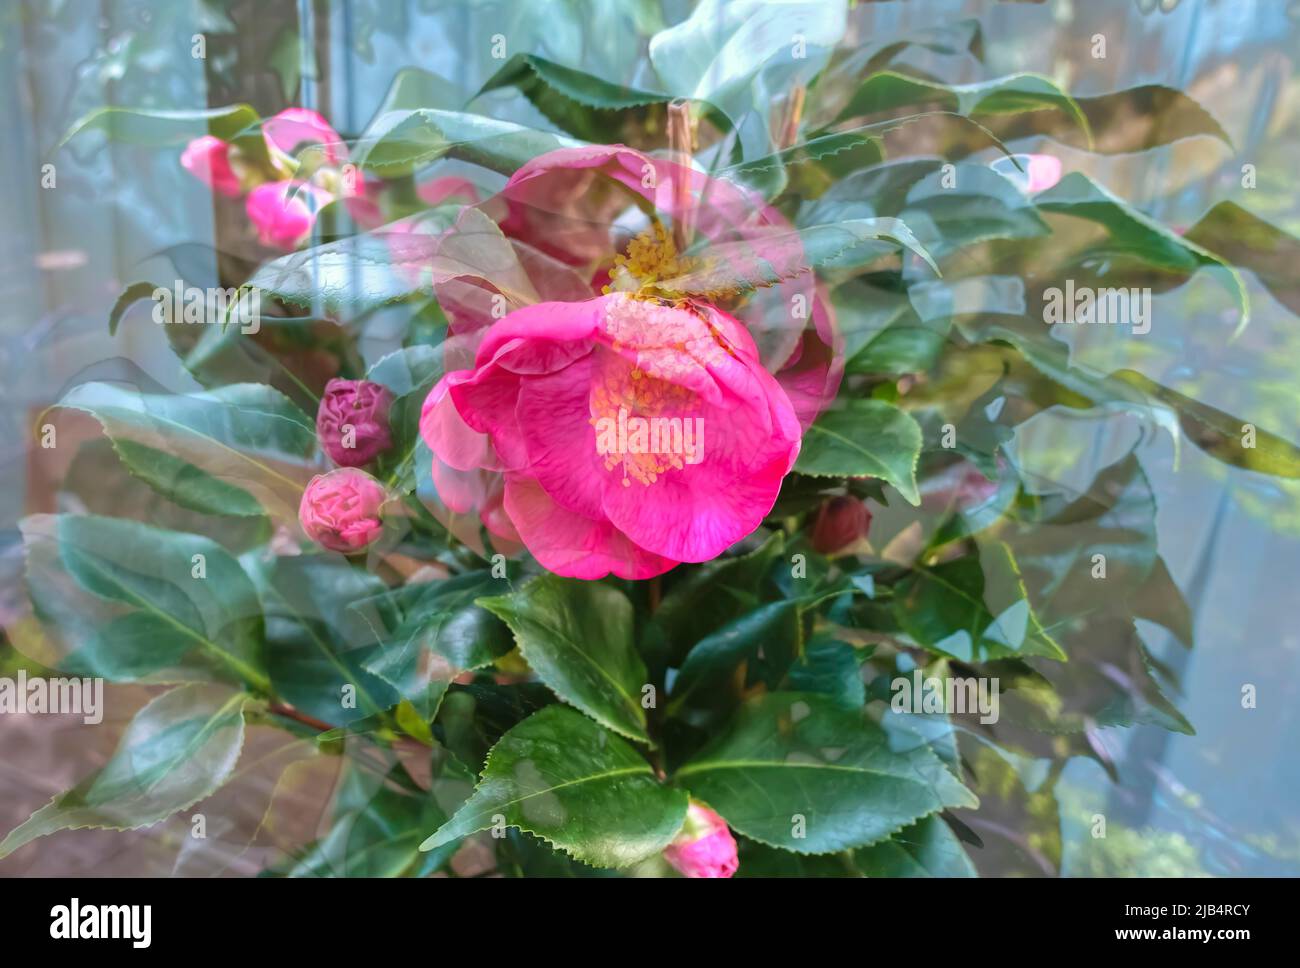 Flowers creative, artistic shot, camellias (Camellia) camellias, red flowers alienated, plants, fragrant, Germany Stock Photo